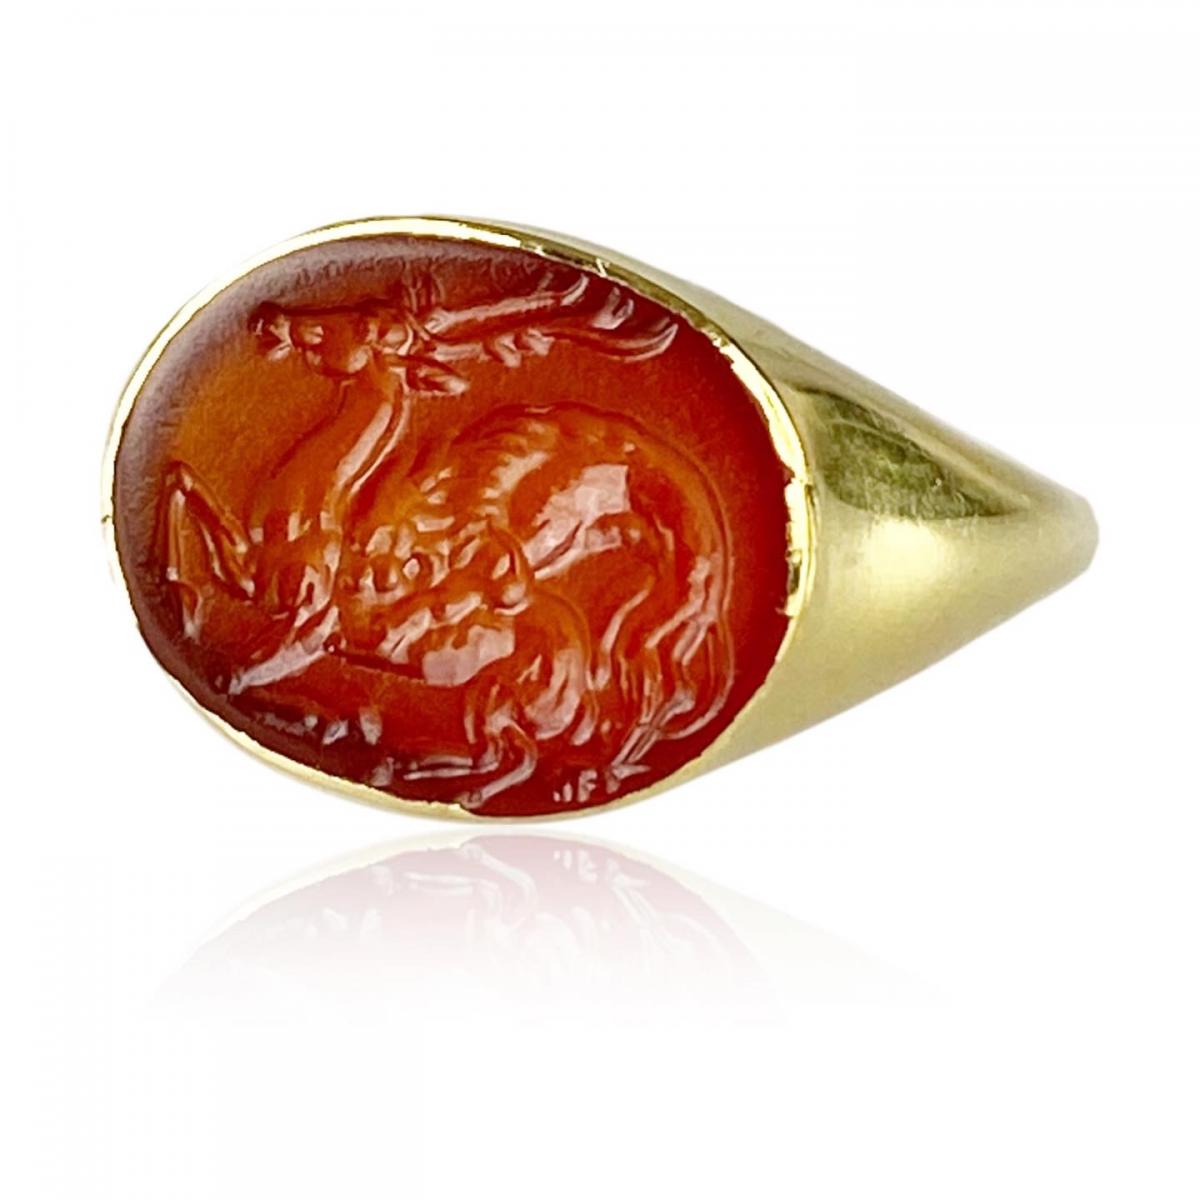 Agate scaraboid ring engraved with a lion seizing a deer. Greek, 5th century BC